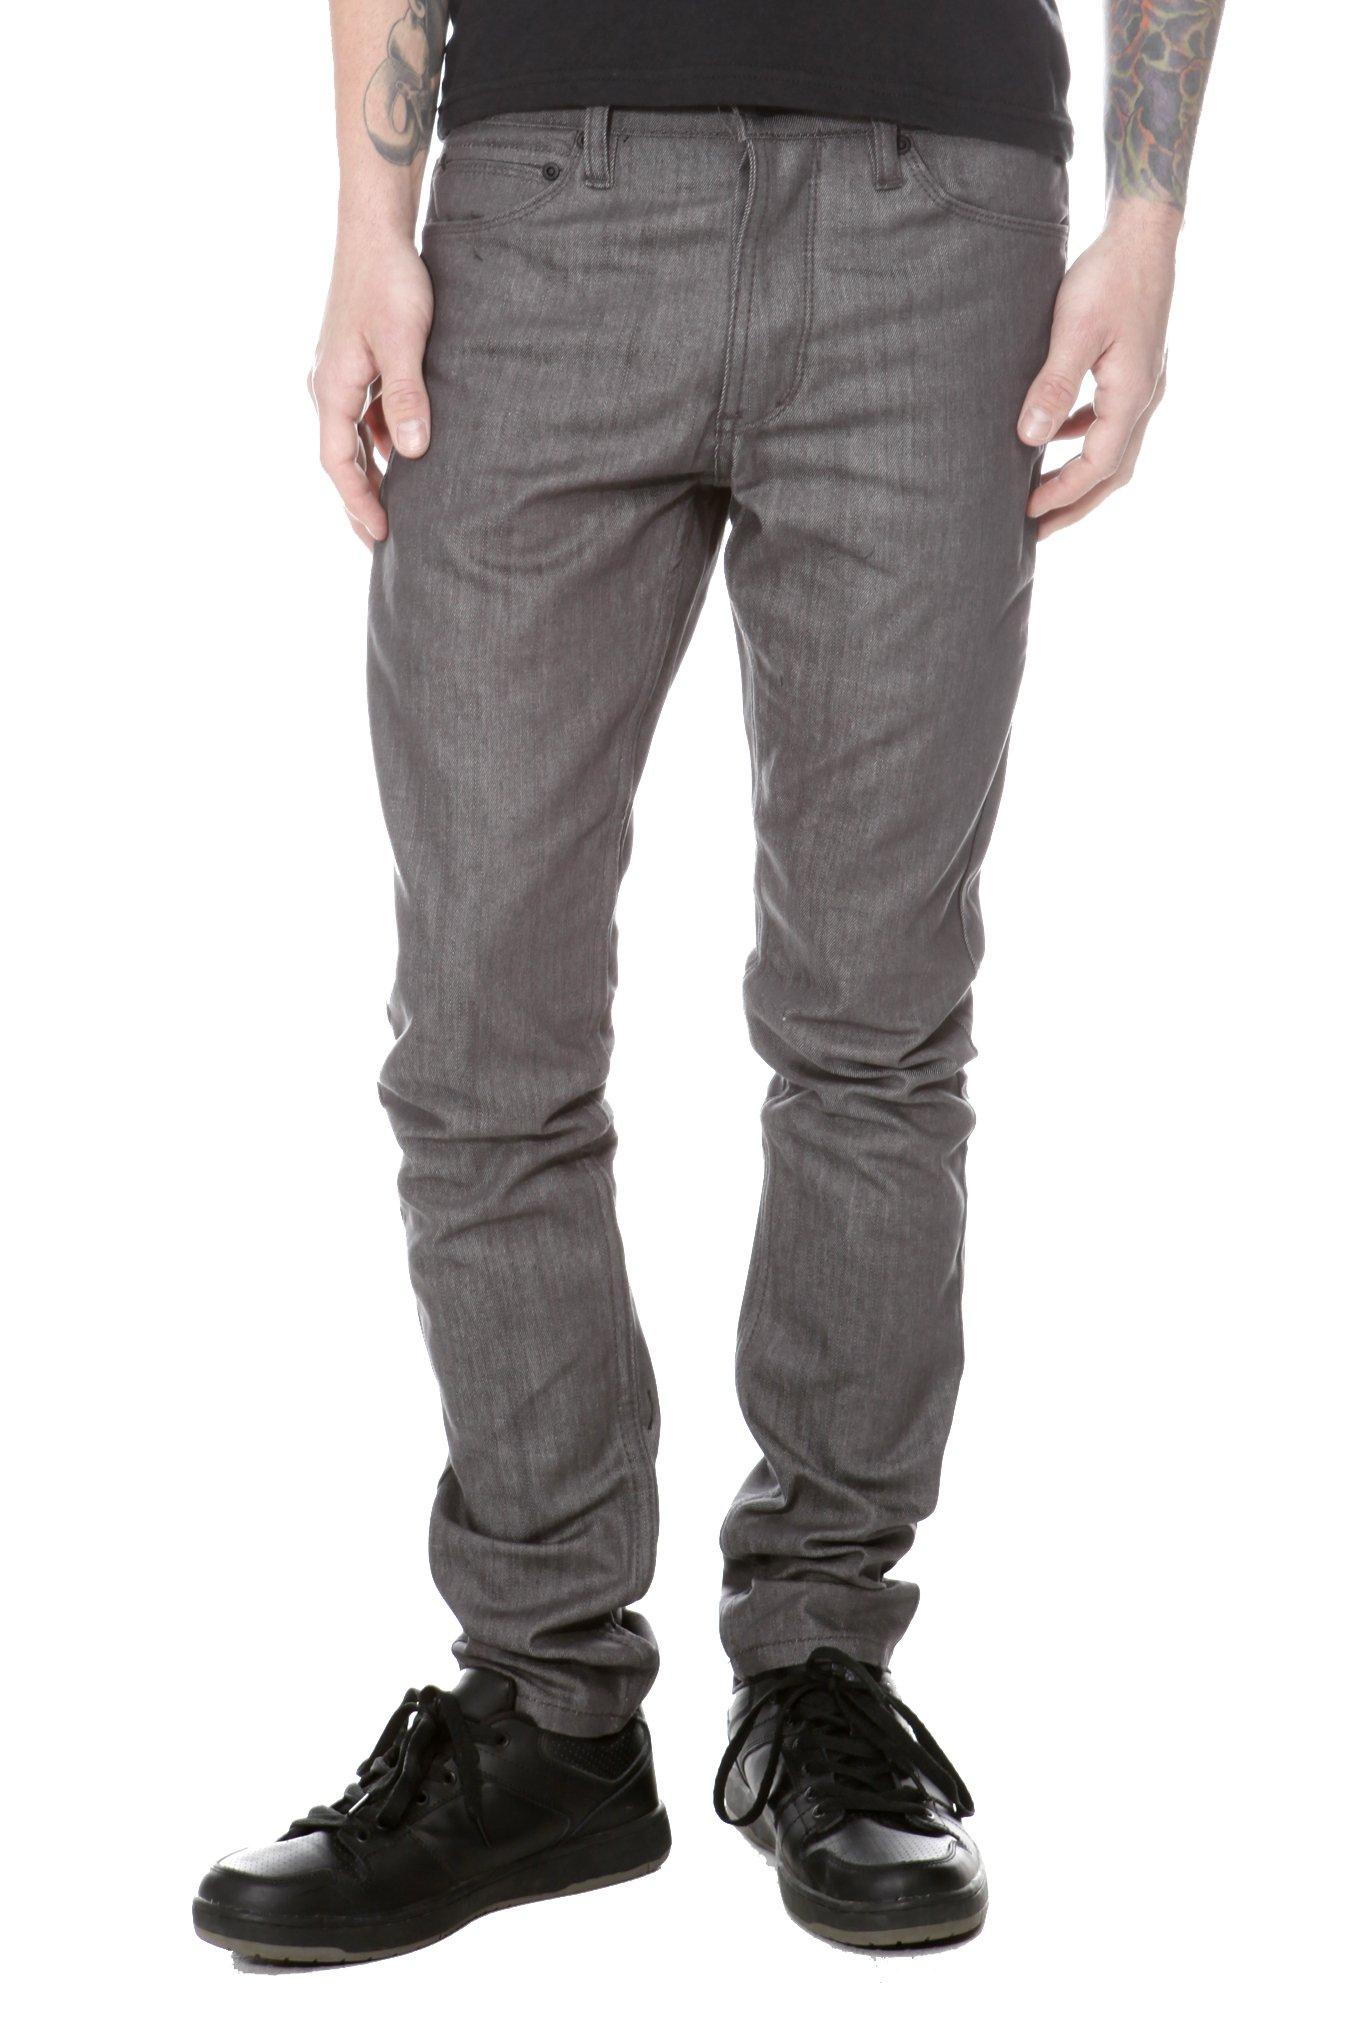 RUDE Grey Raw Slouch Skinny Jeans, LIGHT GRAY, hi-res